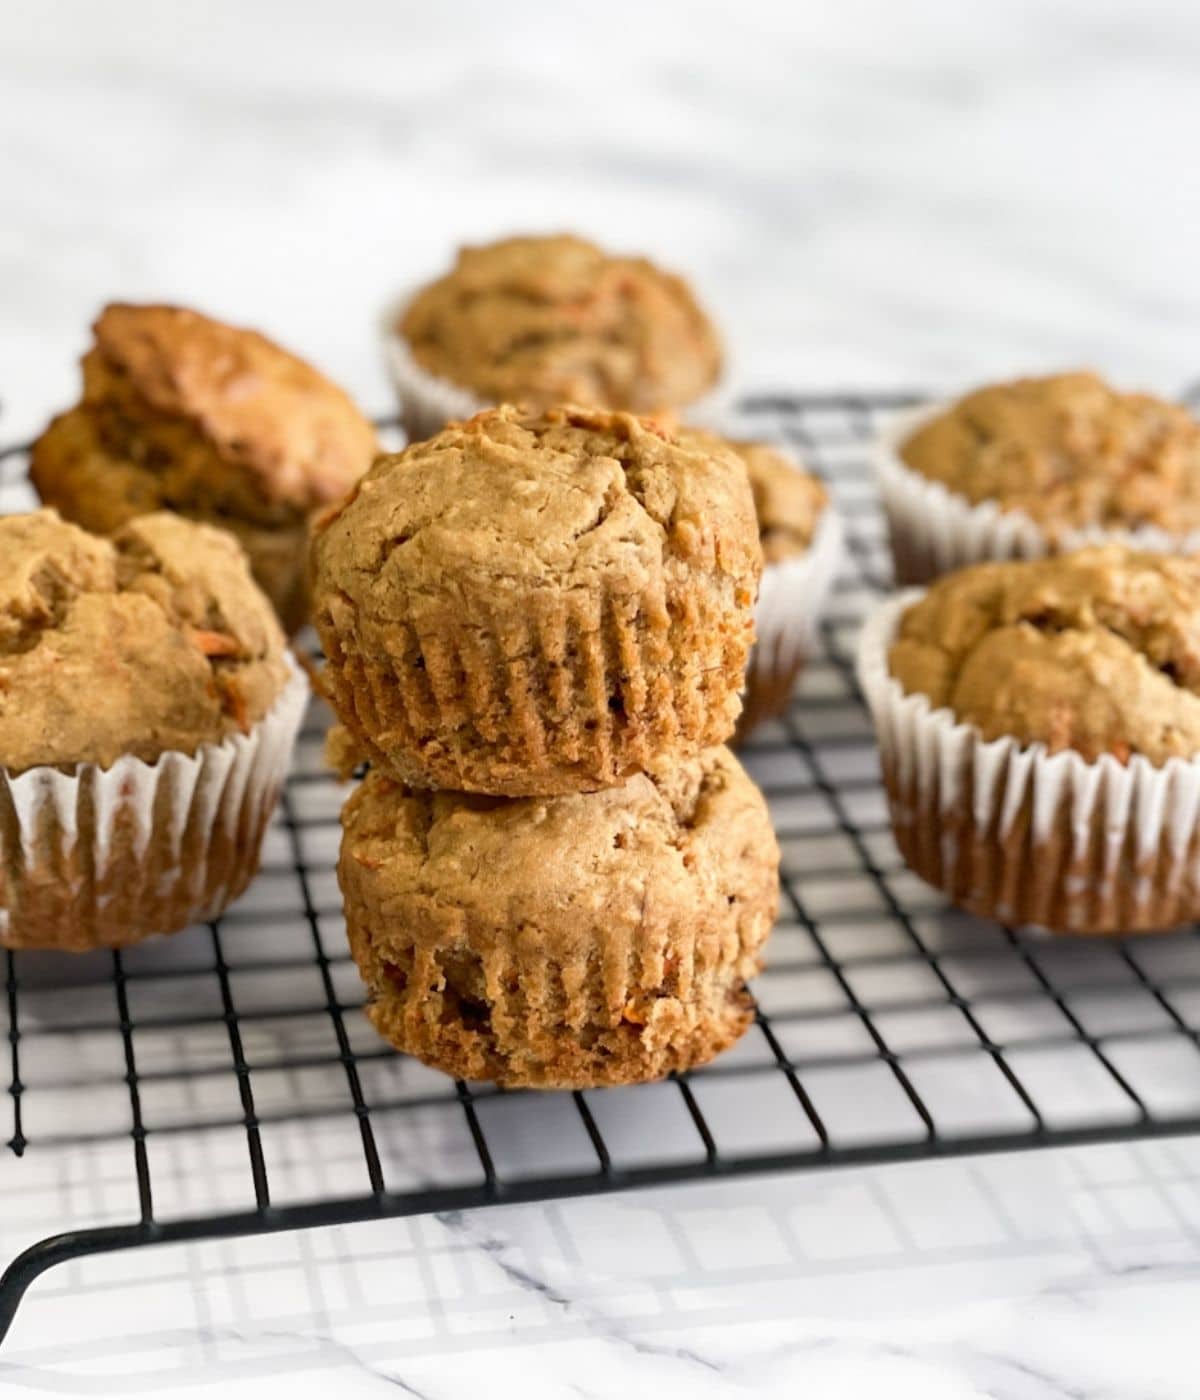 Stacked banana carrot muffins are on the wire rack.